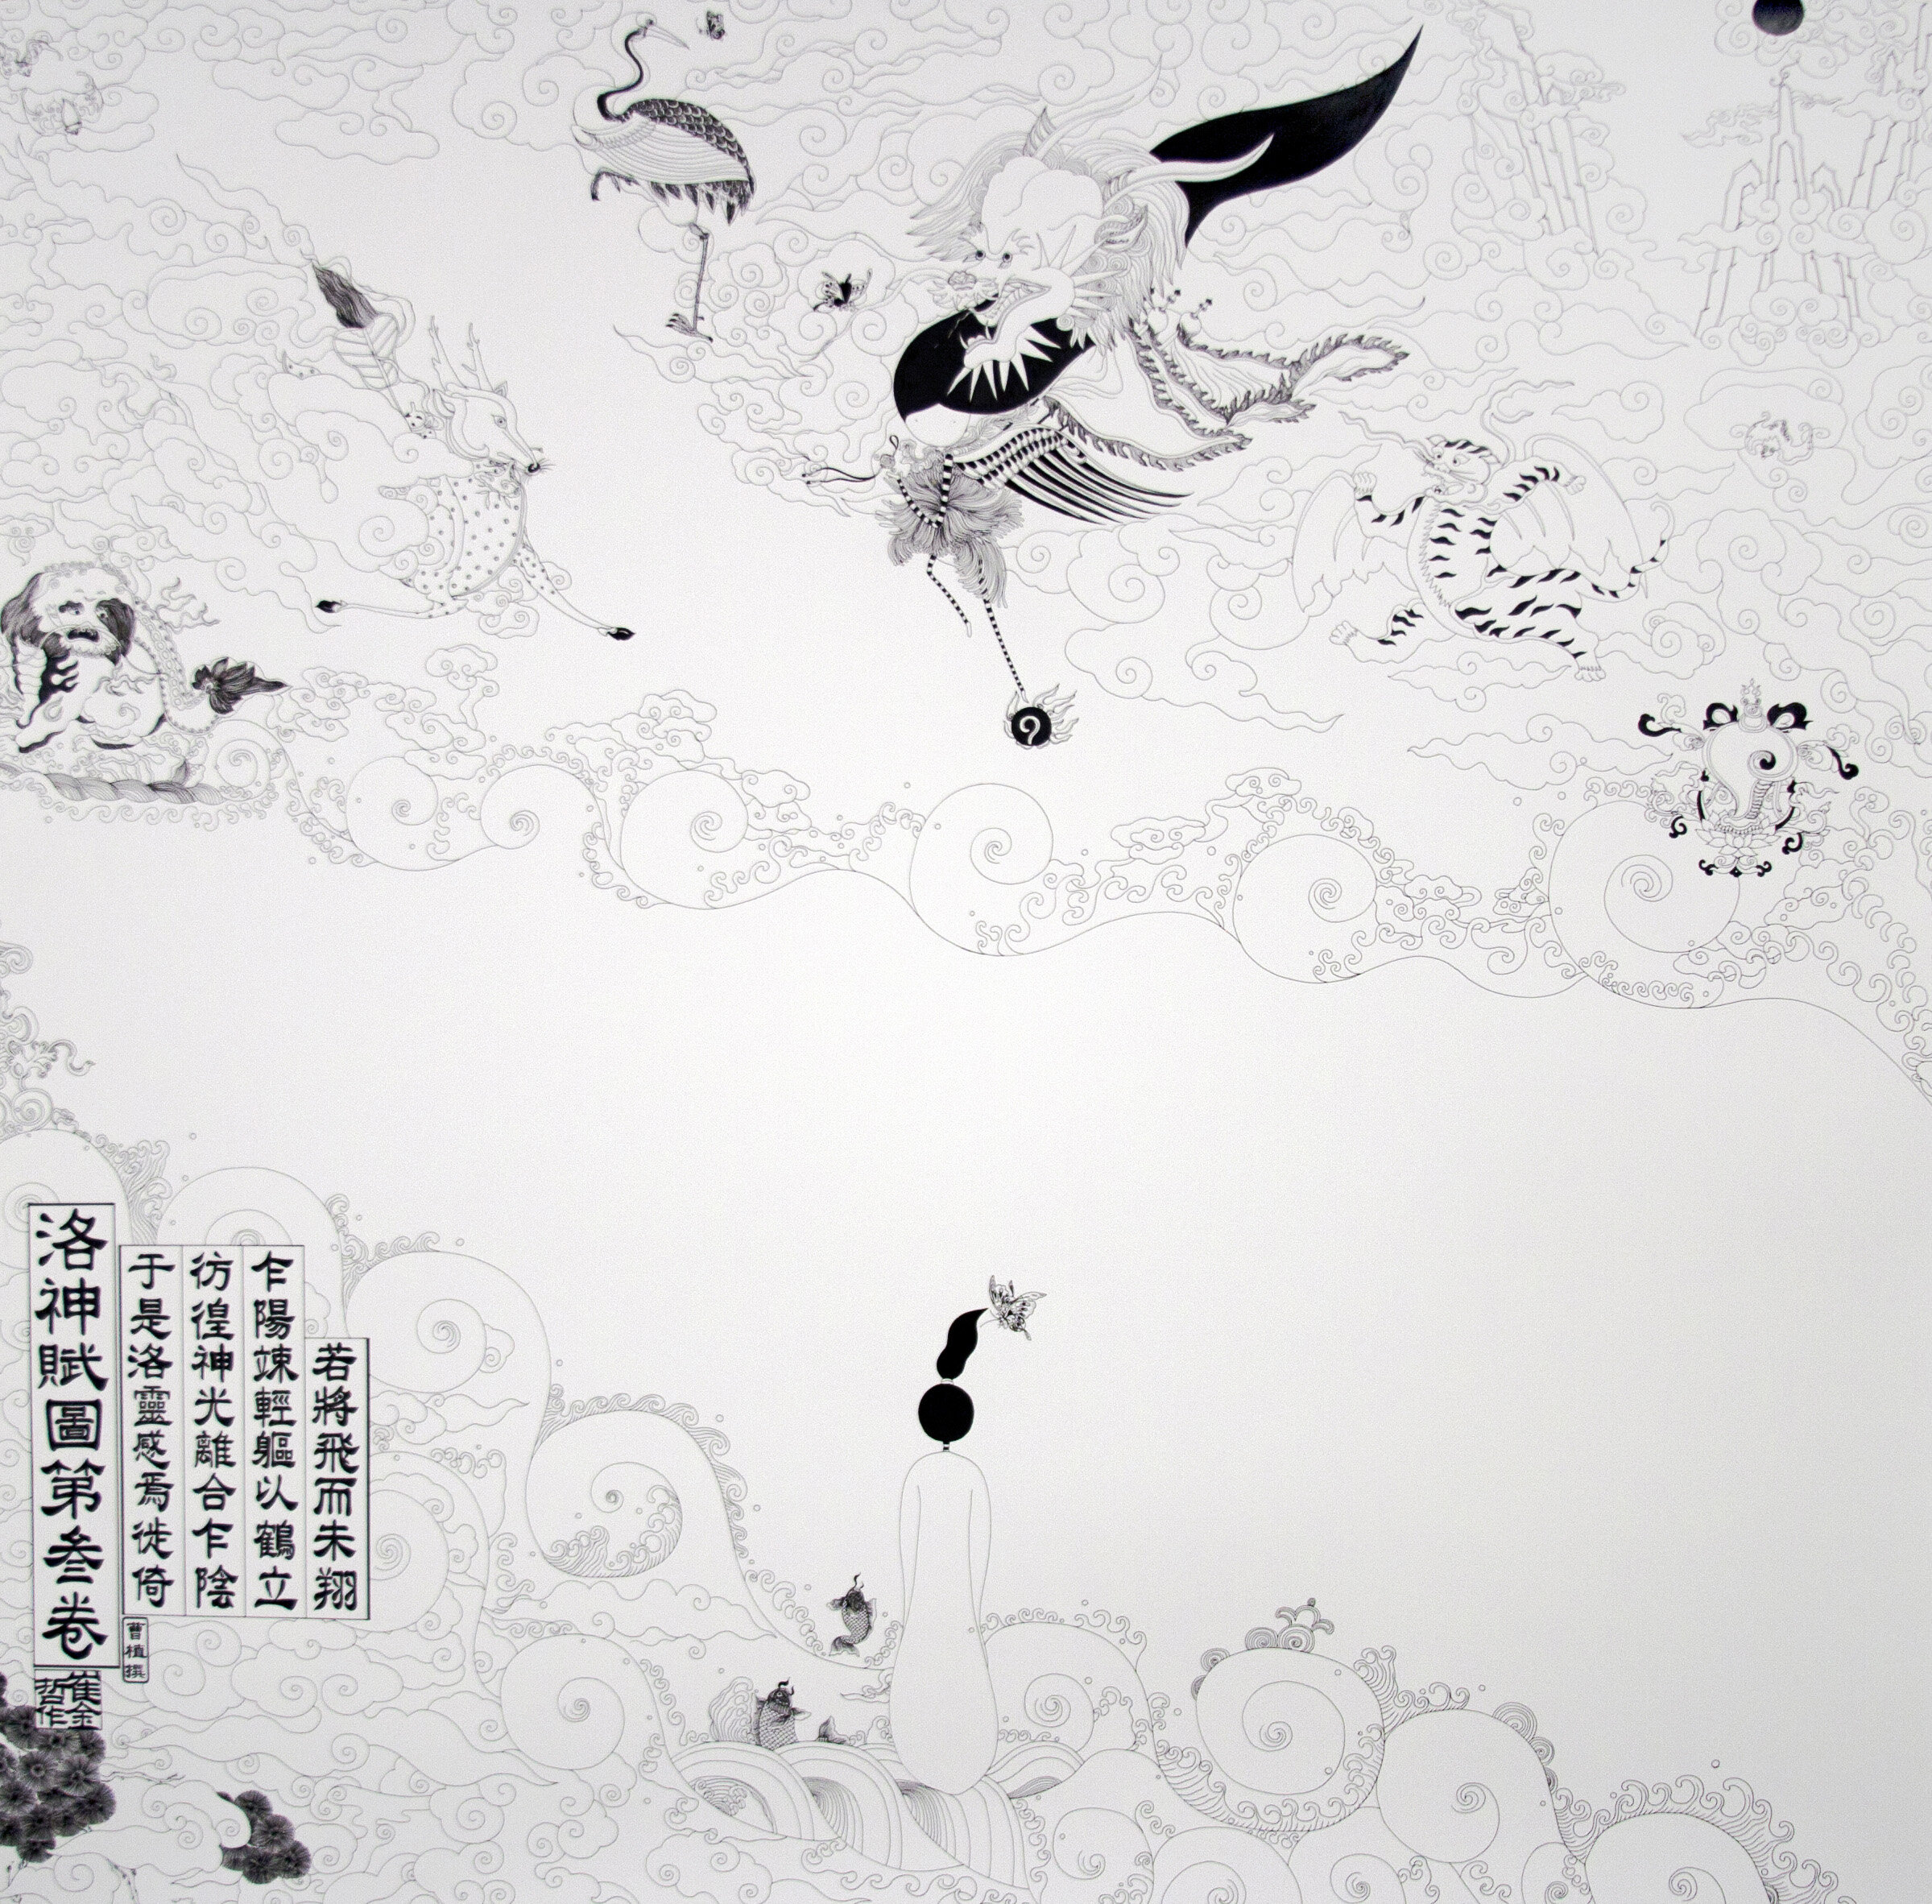  Cui Jinzhe, 卷三“思慕” The Desire to Meet and Stay with Each Other , 2014. ink on paper. Photo: courtesy of the artist. 